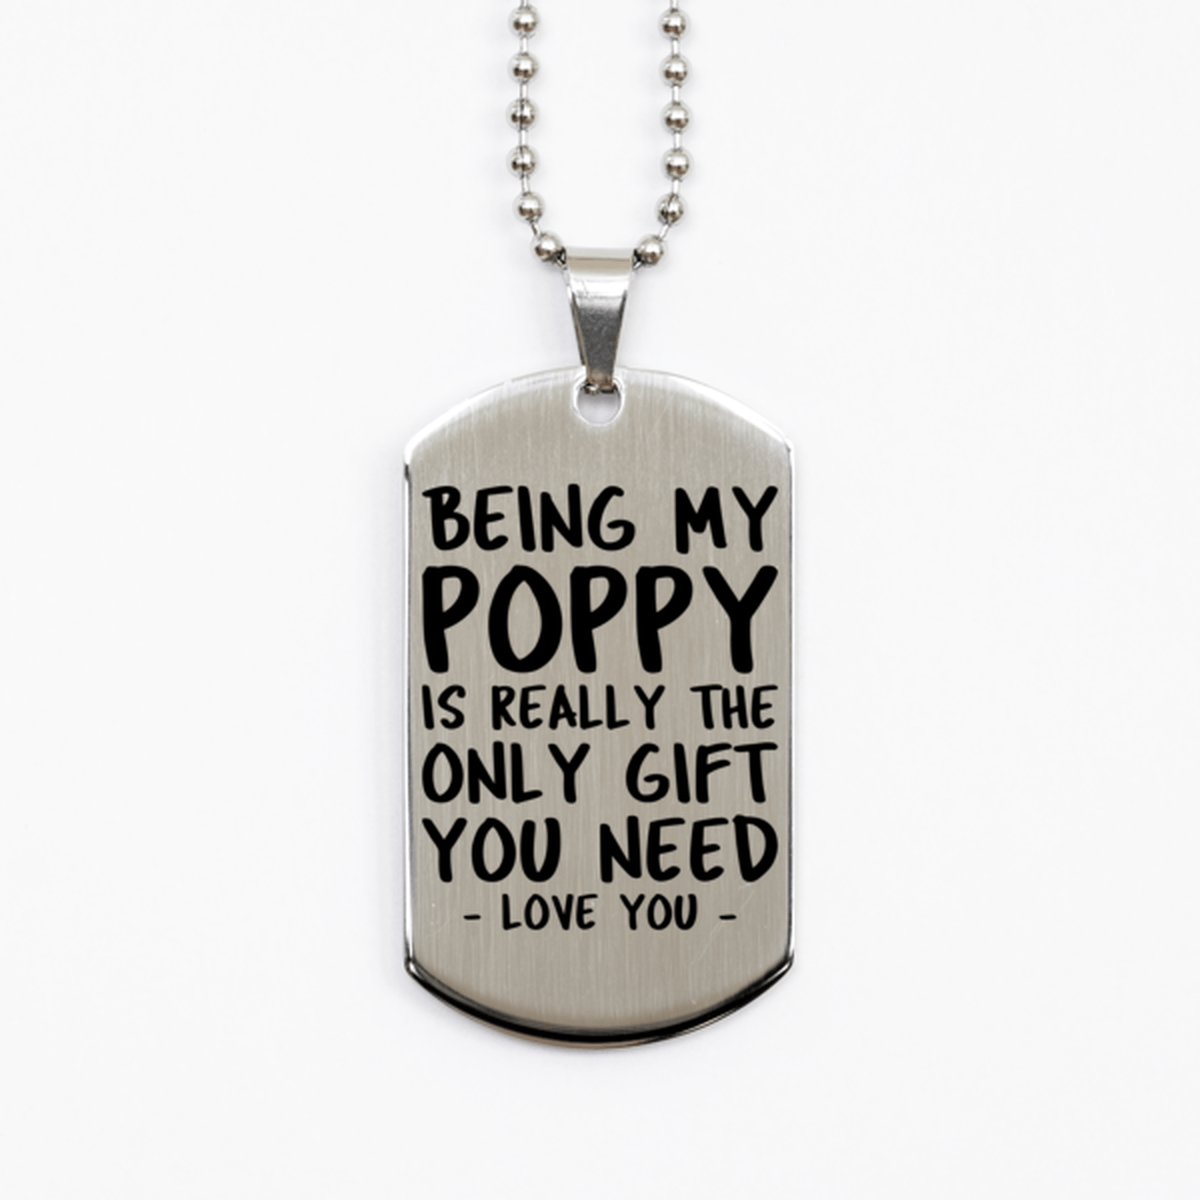 Funny Poppy Silver Dog Tag Necklace, Being My Poppy Is Really the Only Gift You Need, Best Birthday Gifts for Poppy